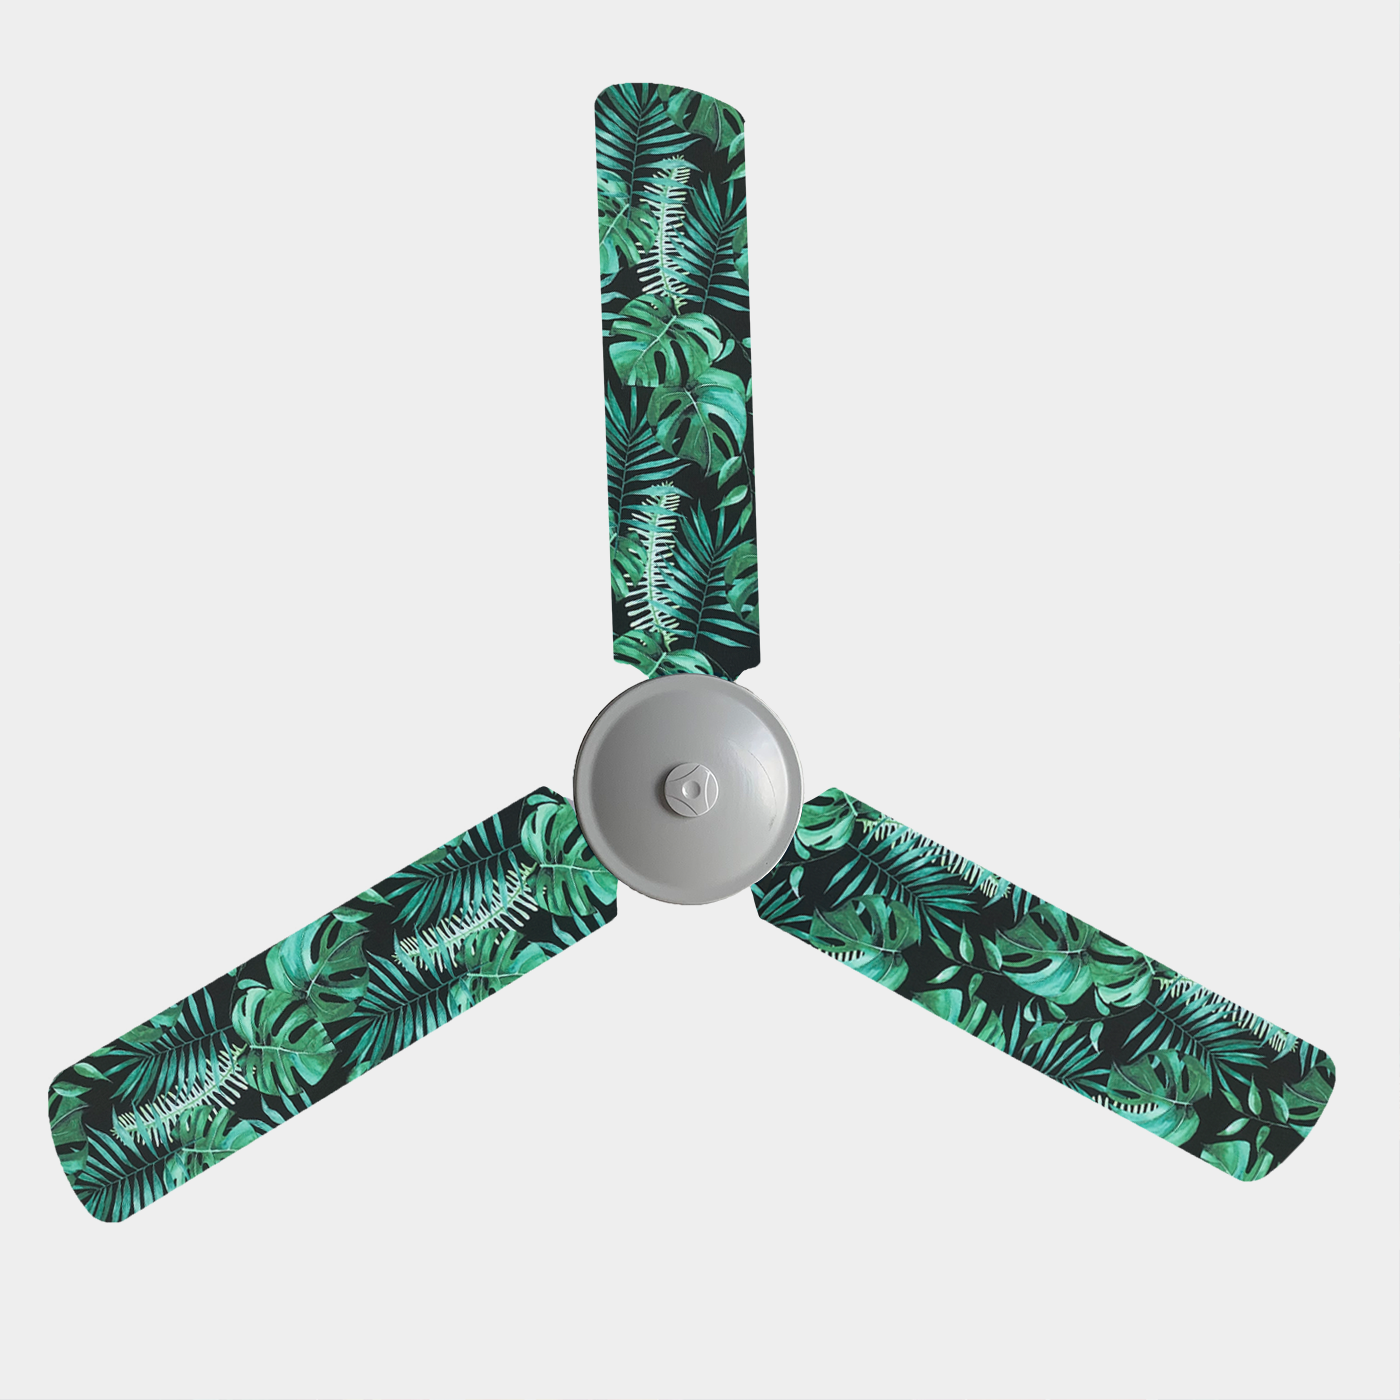 Three blade ceiling fan with fan covers with black background and large green leaves and ferns